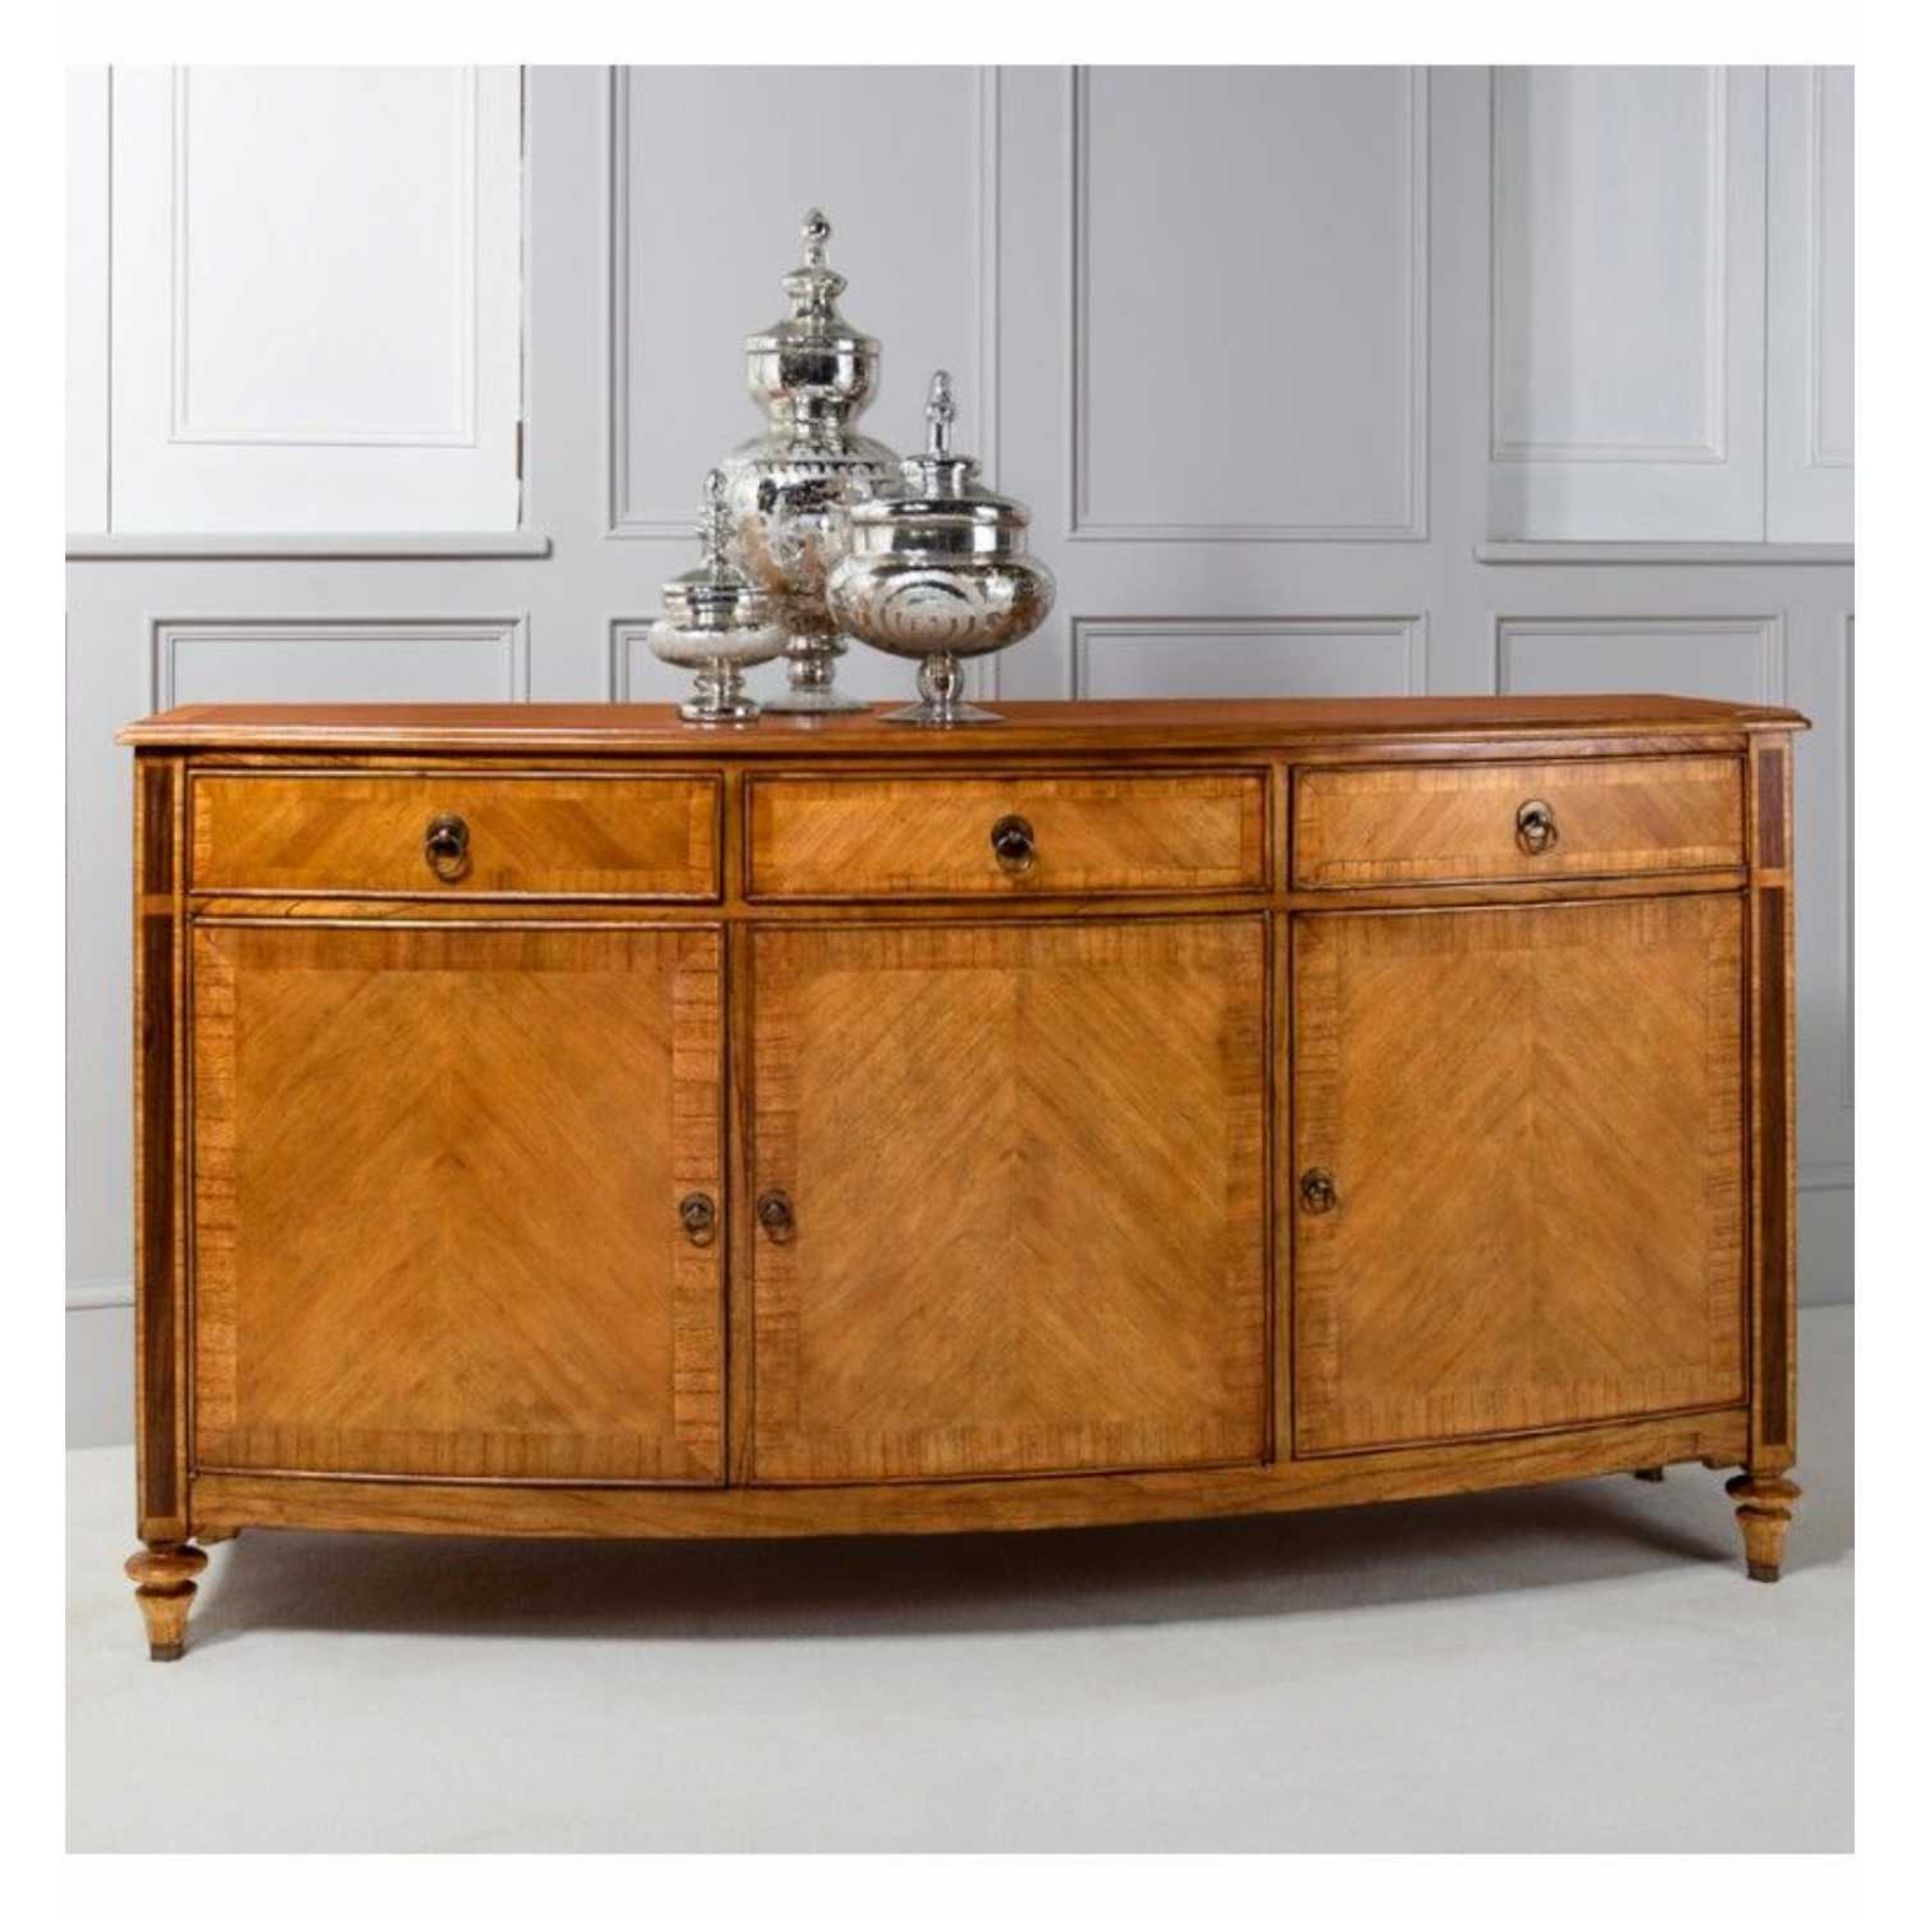 Spire Dining Large Sideboard Blonde European walnut with intricate inlays, antiqued hand wax